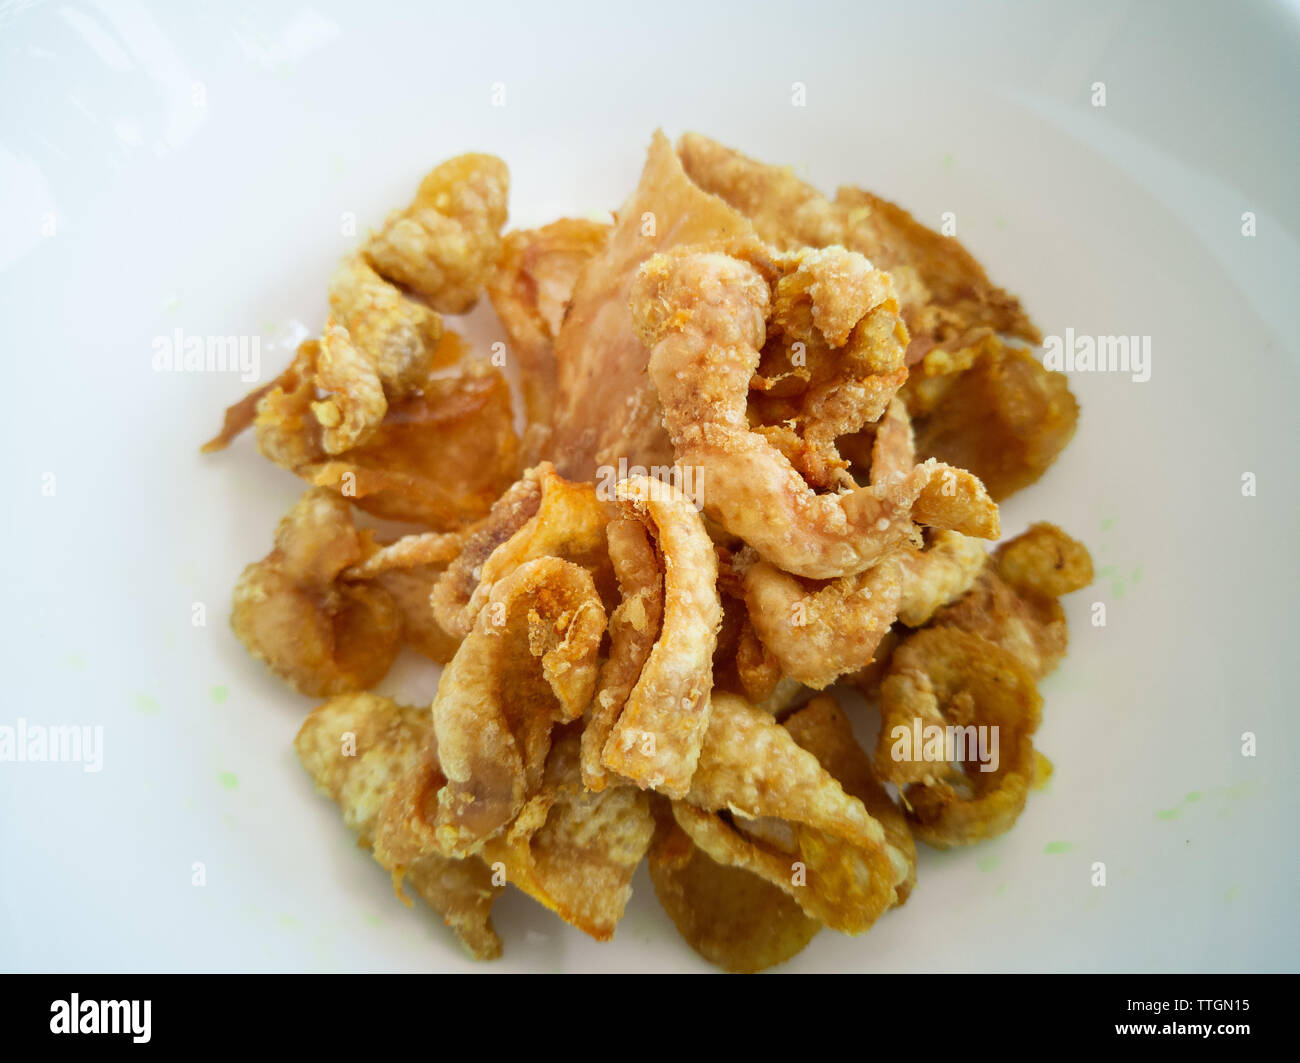 Close up of deep-fried chicken skins in a white bowl. Stock Photo